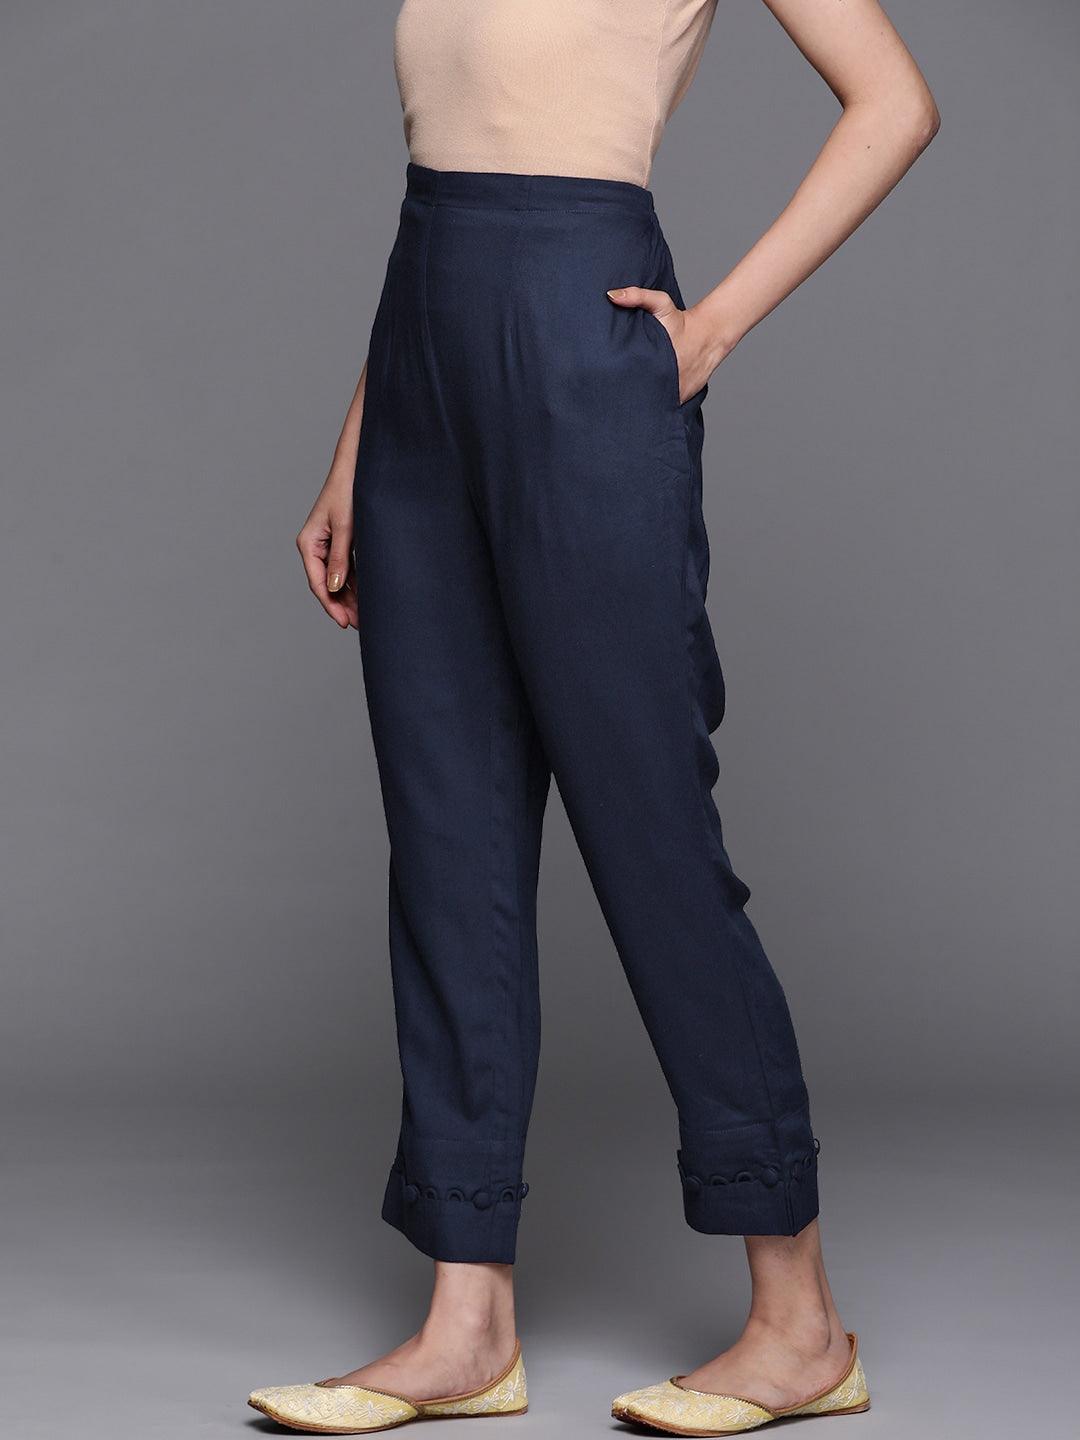 Blue Solid Rayon Trousers